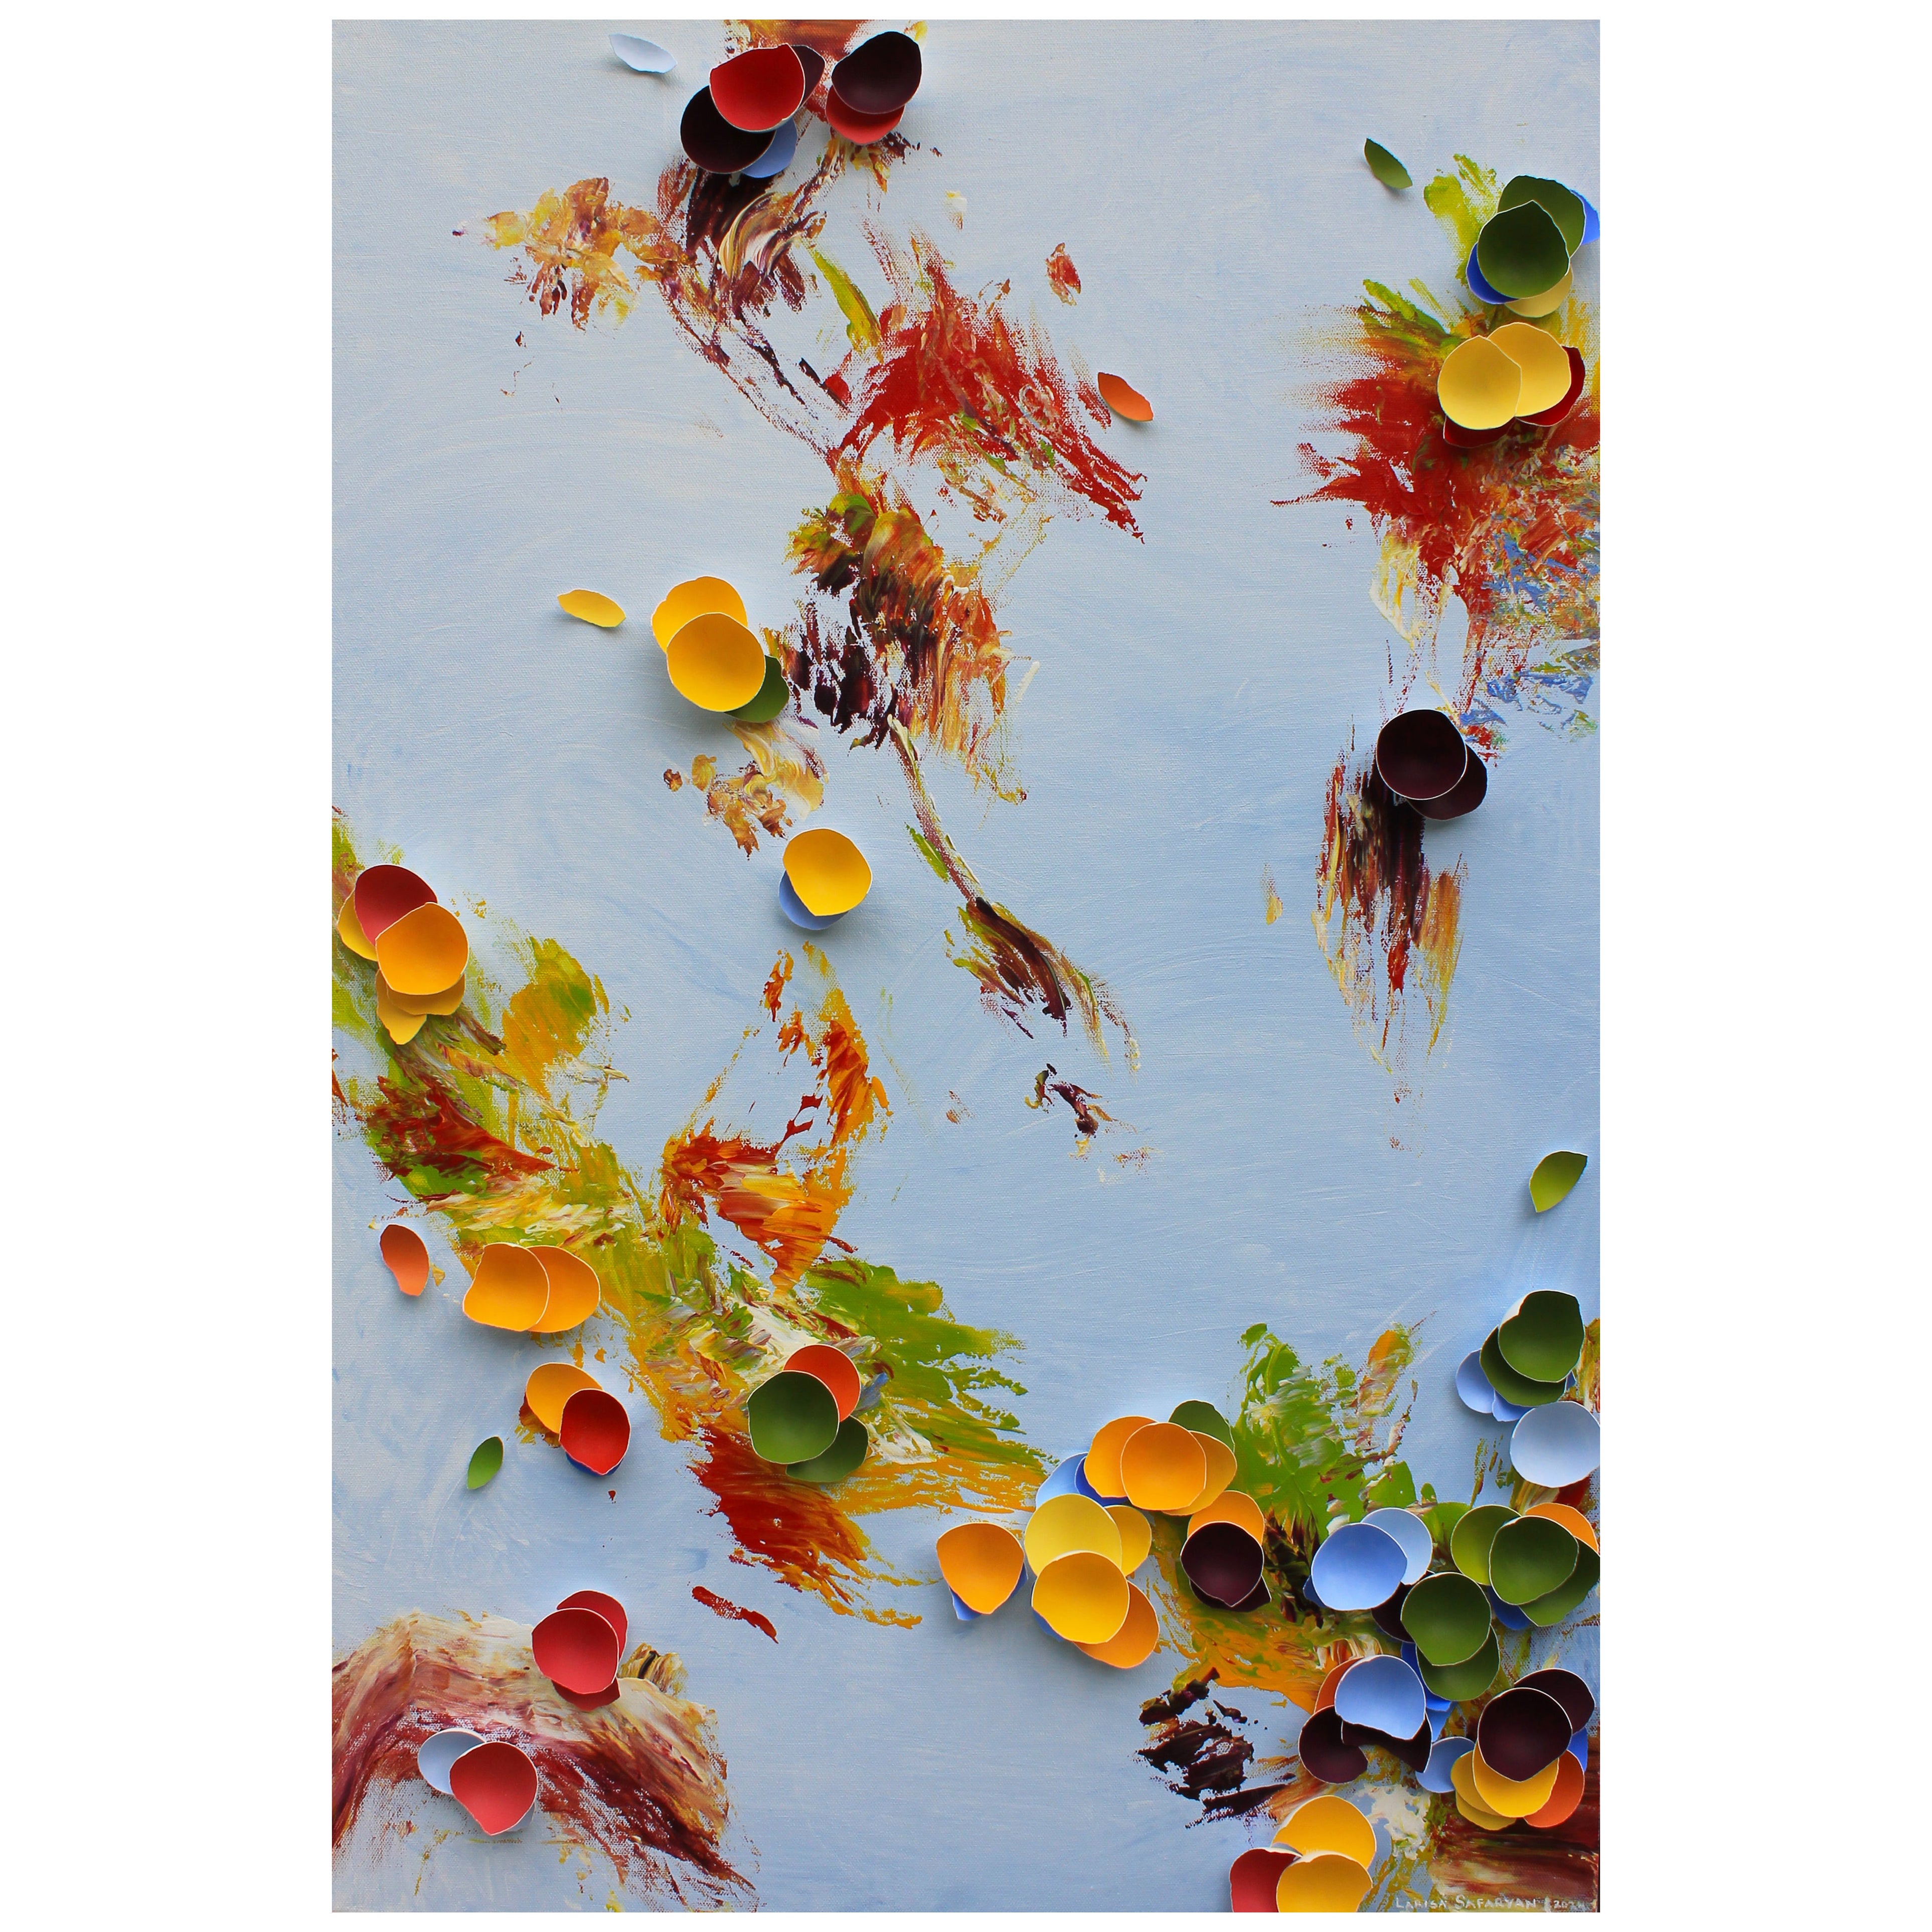 Melodies in Flight II by Larisa Safaryan  Acrylic paint and eggshells on canvas For Sale